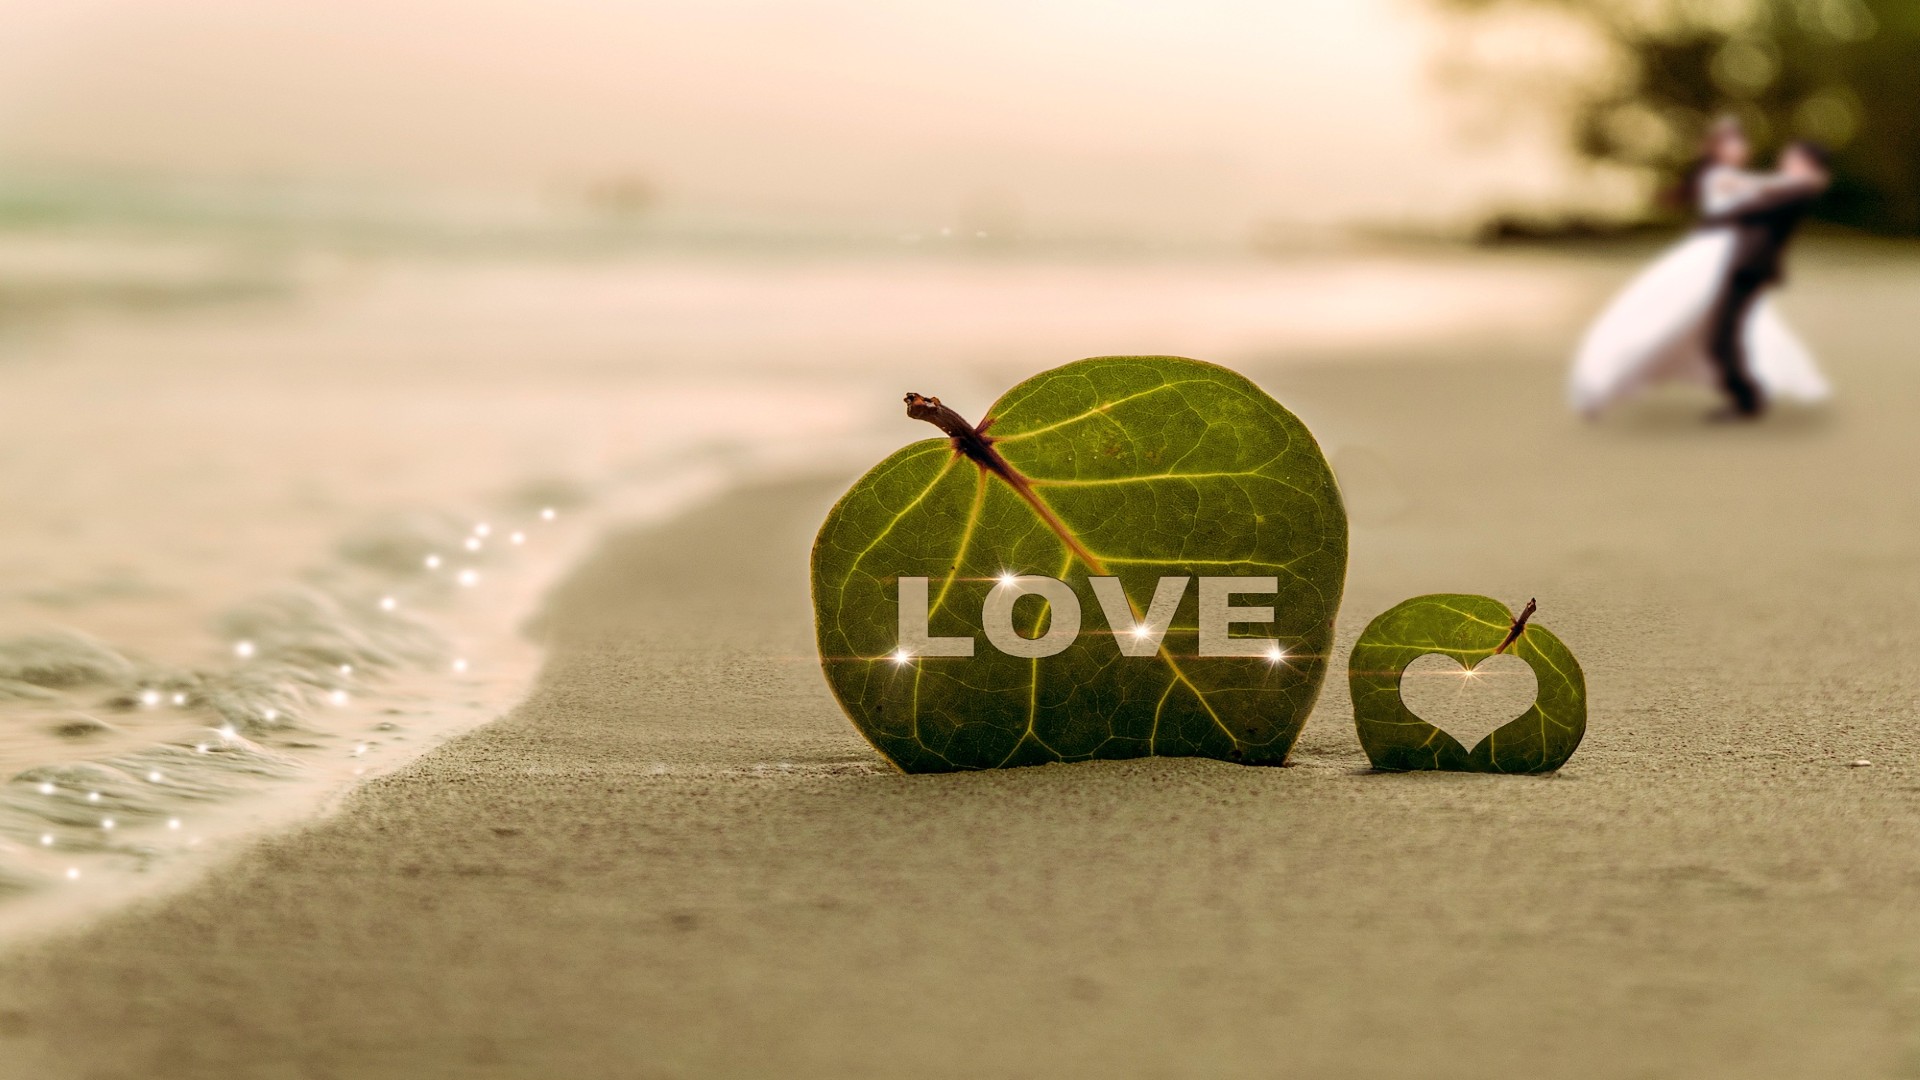 Love Couple Wallpaper, Love Couple Images And Wallpapers - Love Art Images Hd - HD Wallpaper 